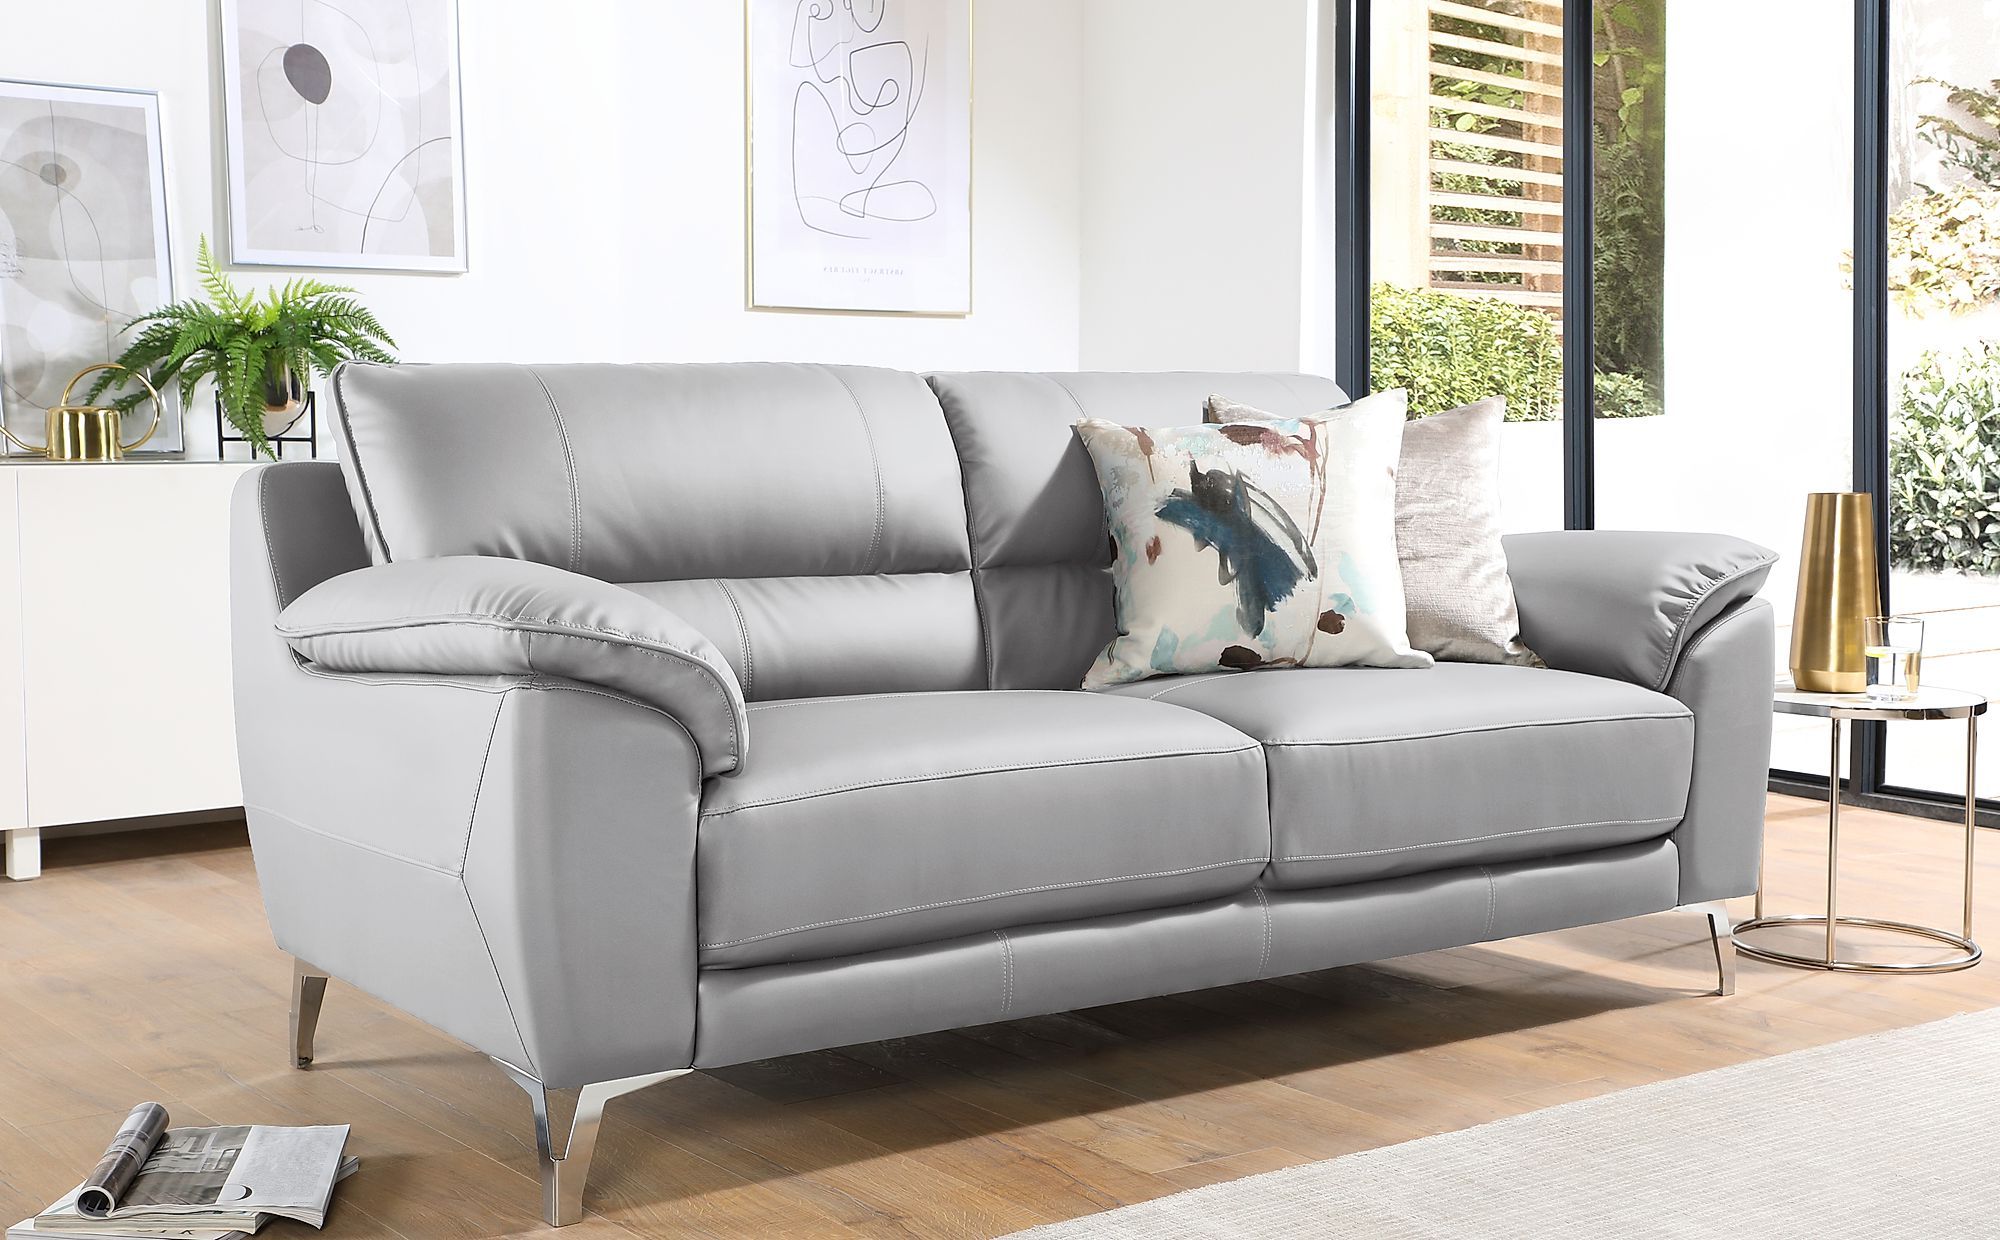 Madrid Light Grey Leather 3 Seater Sofa (View 2 of 15)